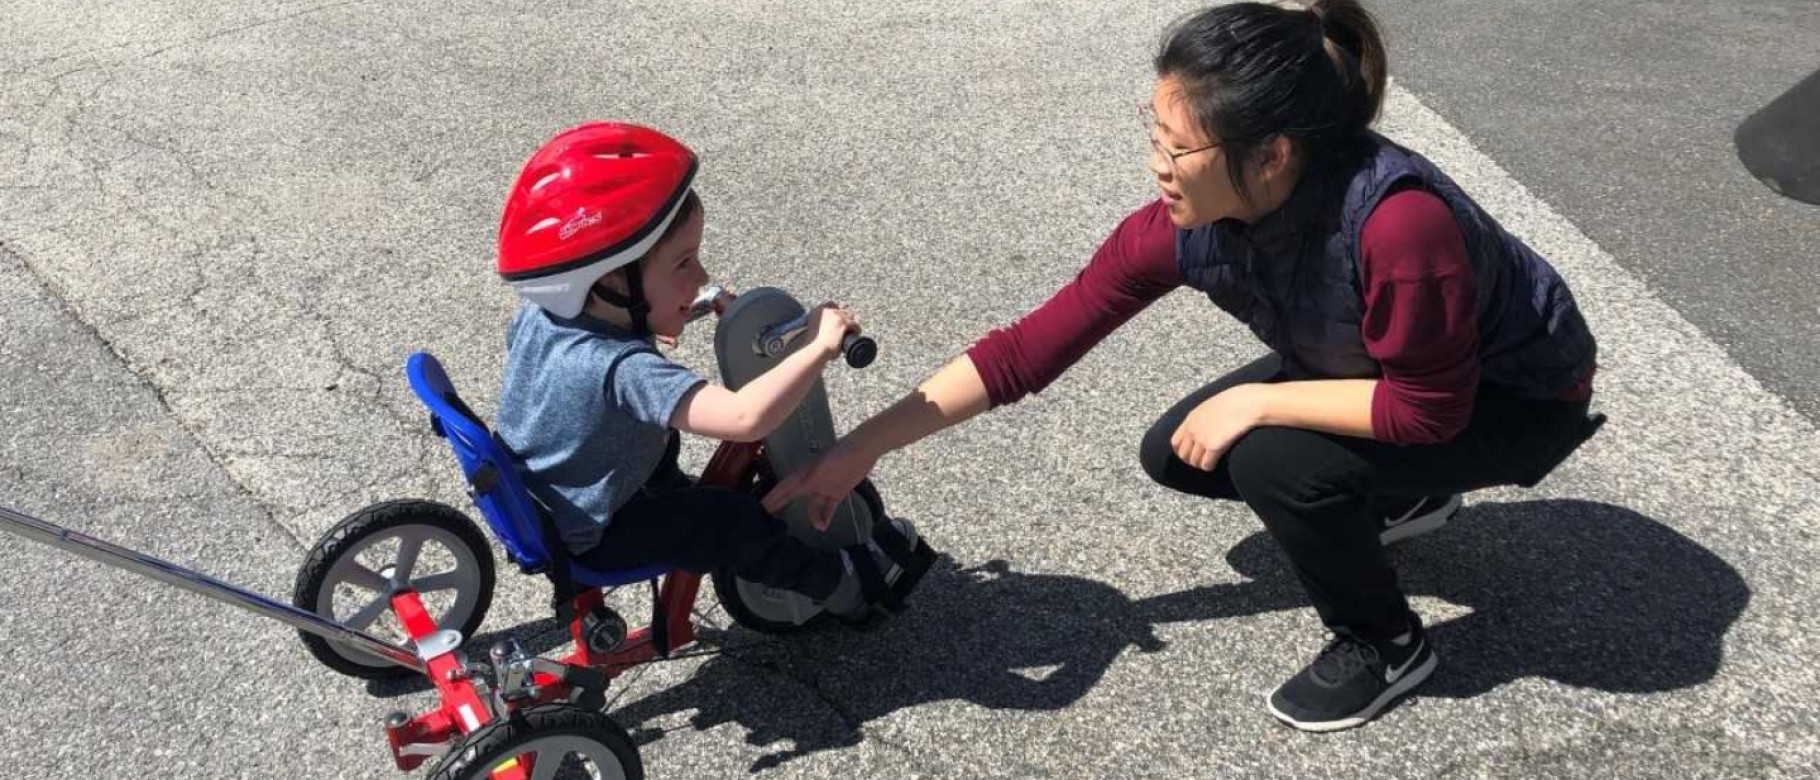 Denise Tso implemented the Bike Day as her LEND Elective Project